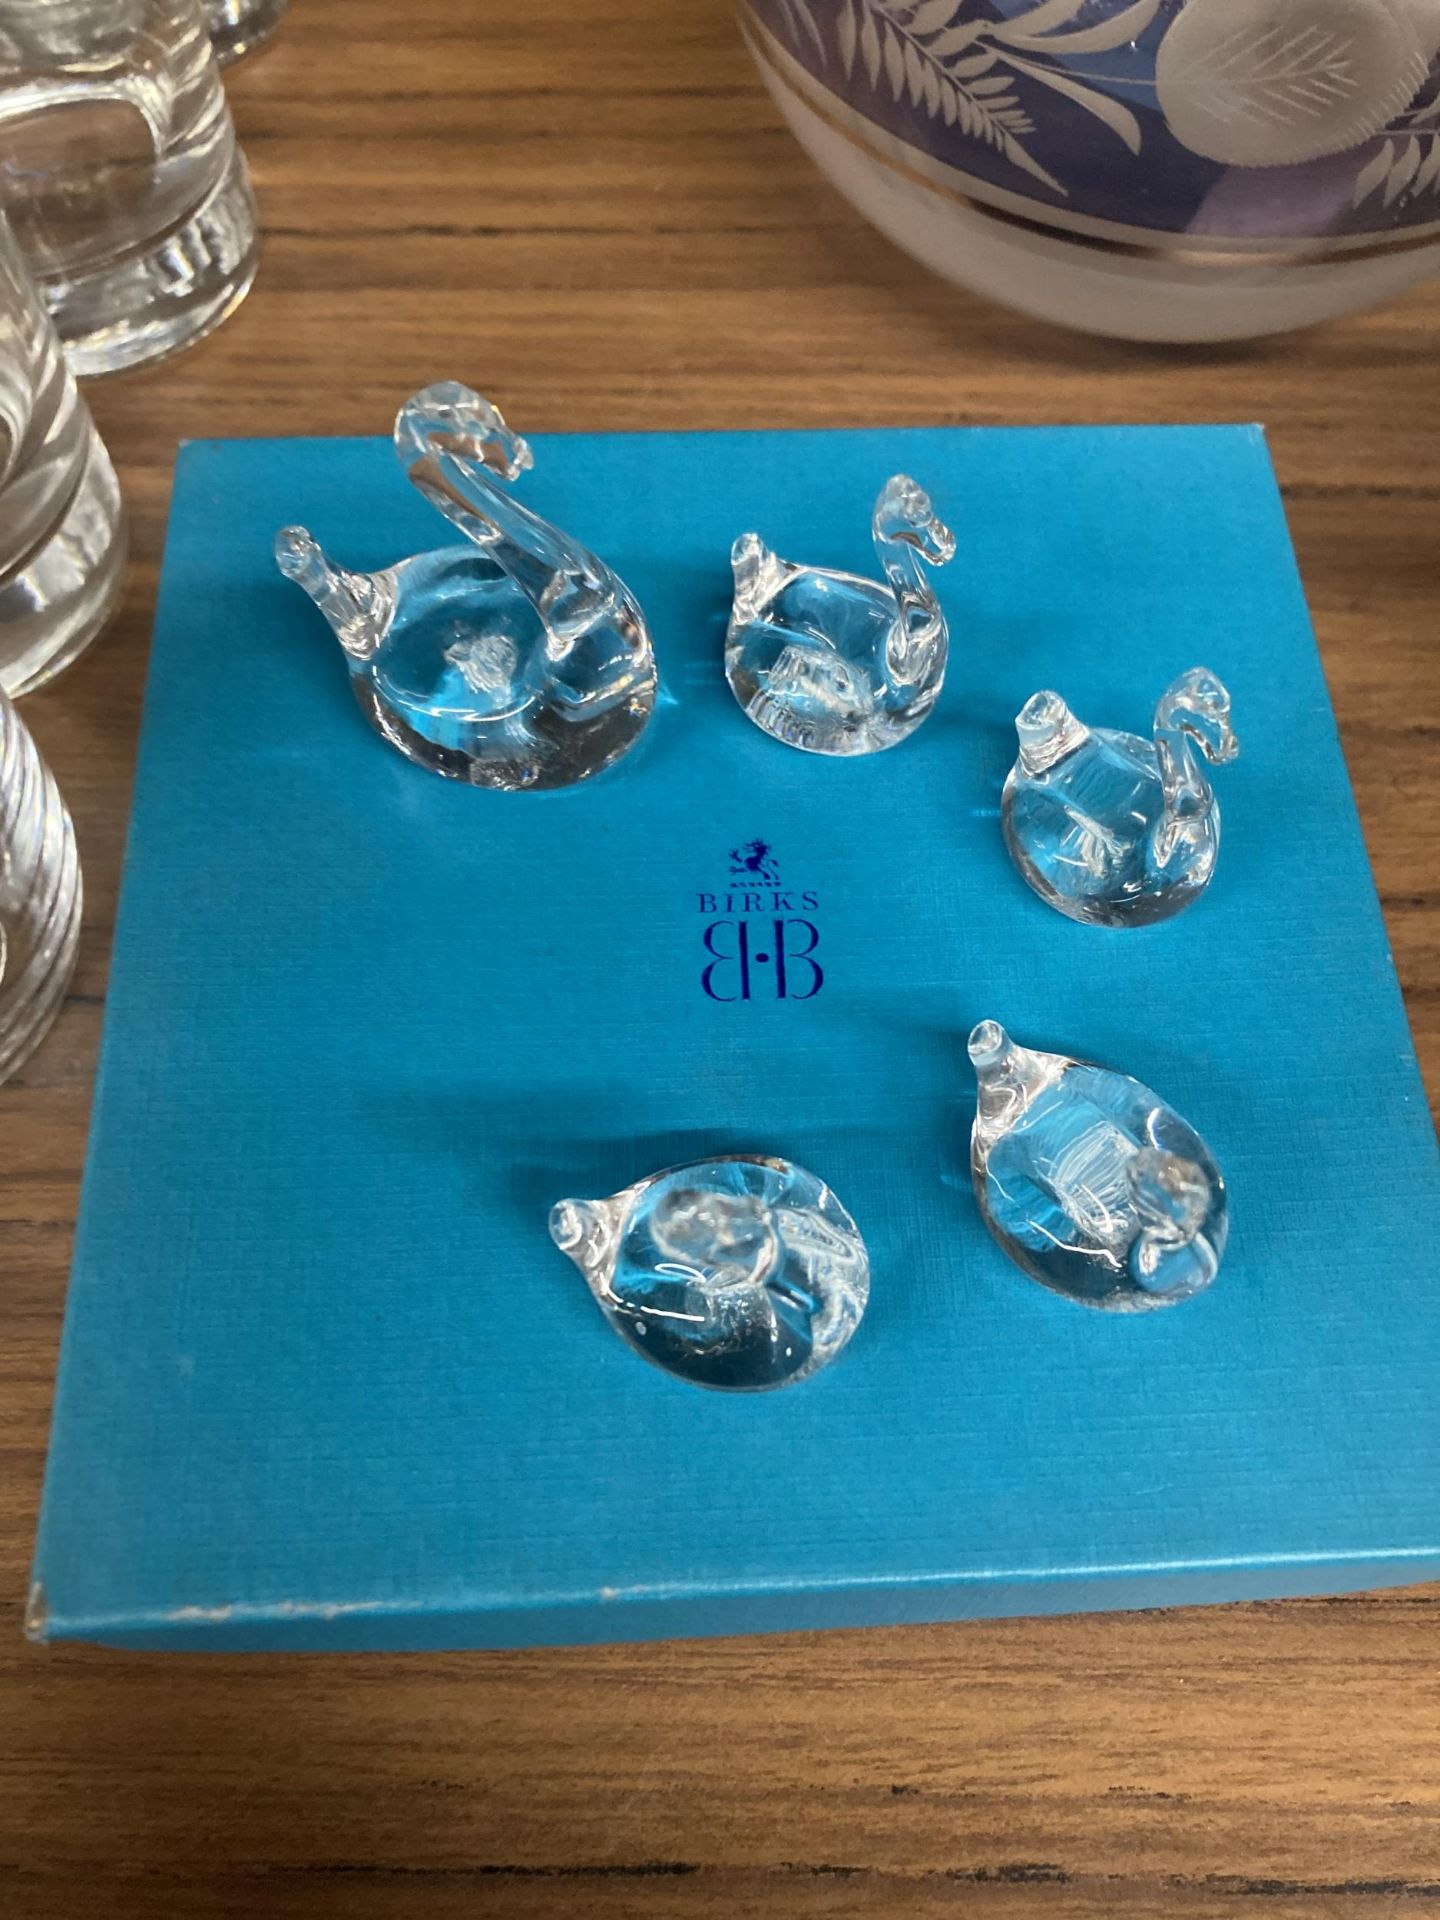 A COLLECTION OF 5 GRADUATING GLASS SWANS BY BIRKS - Image 2 of 4